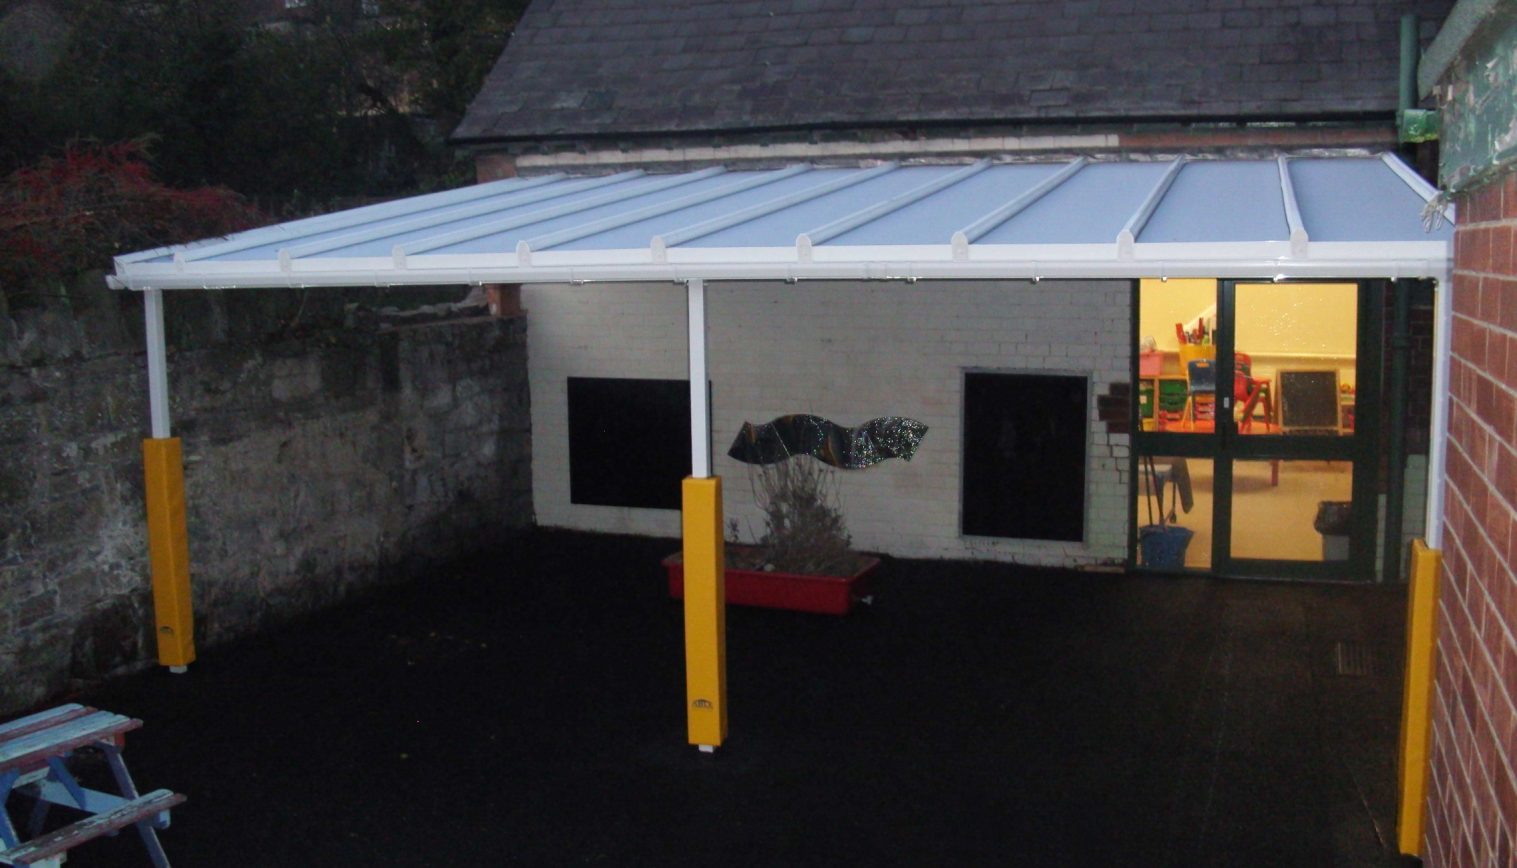 Tanyfron Community Primary School – Wall Mounted Canopy